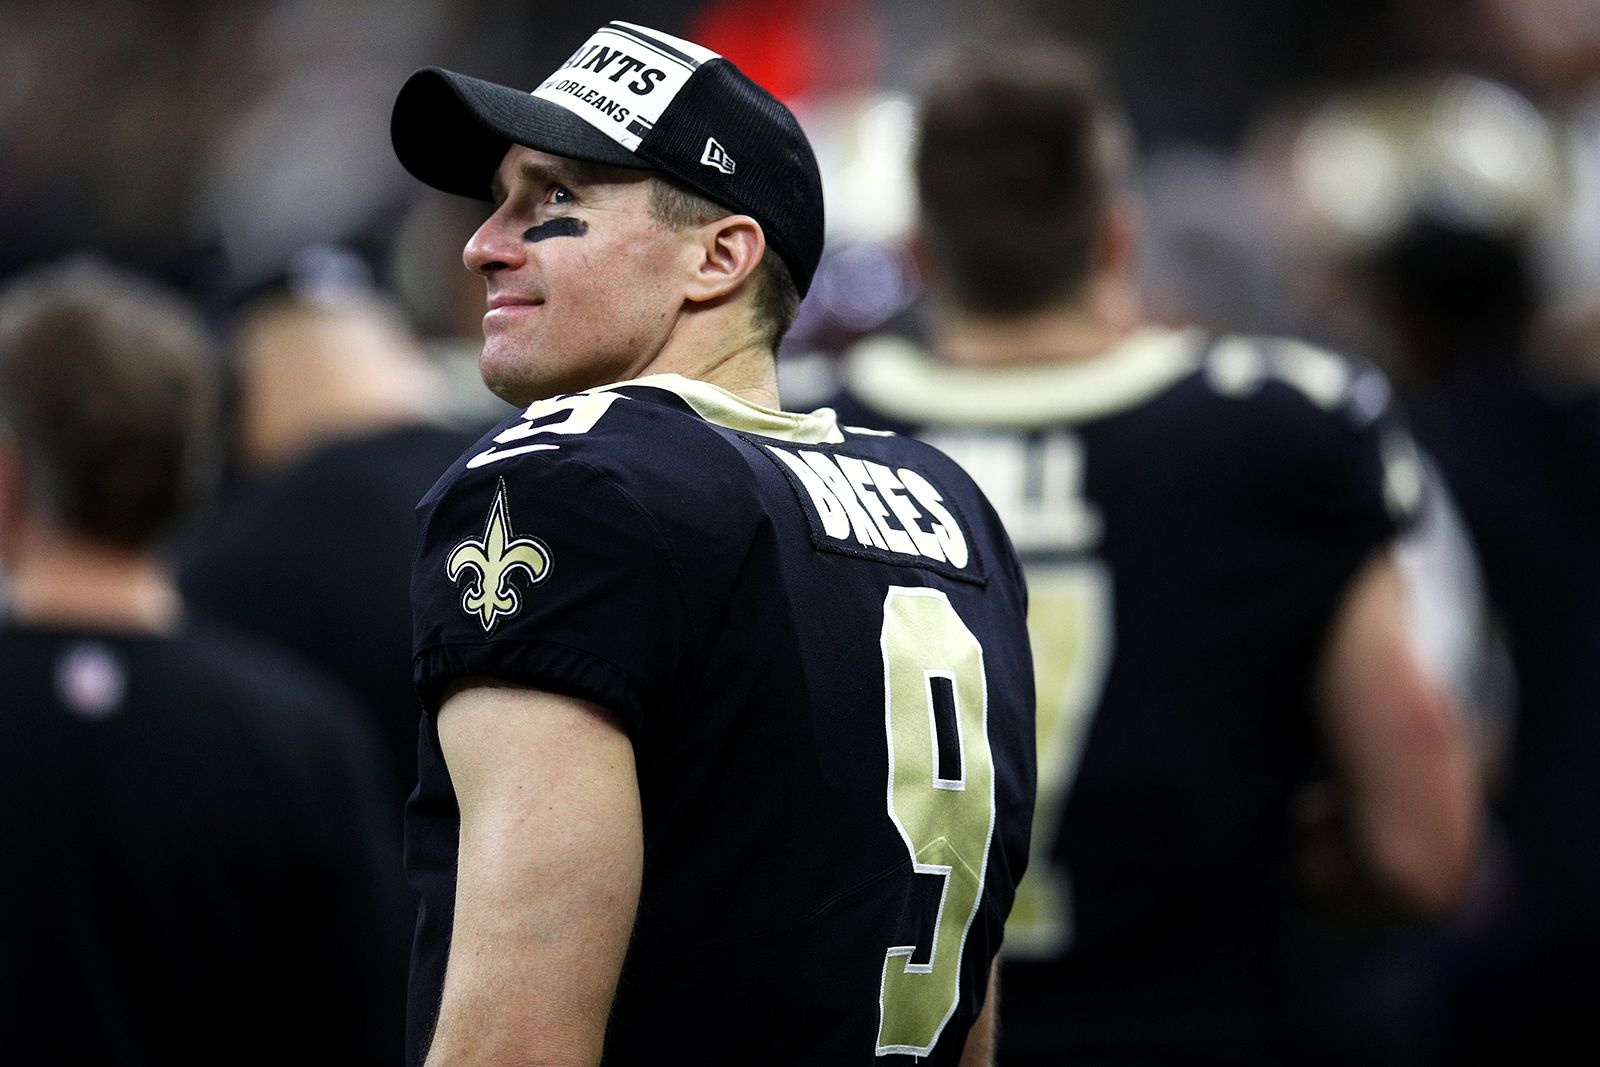 Drew Brees retires: Heart of NFL team and the city of New Orleans 